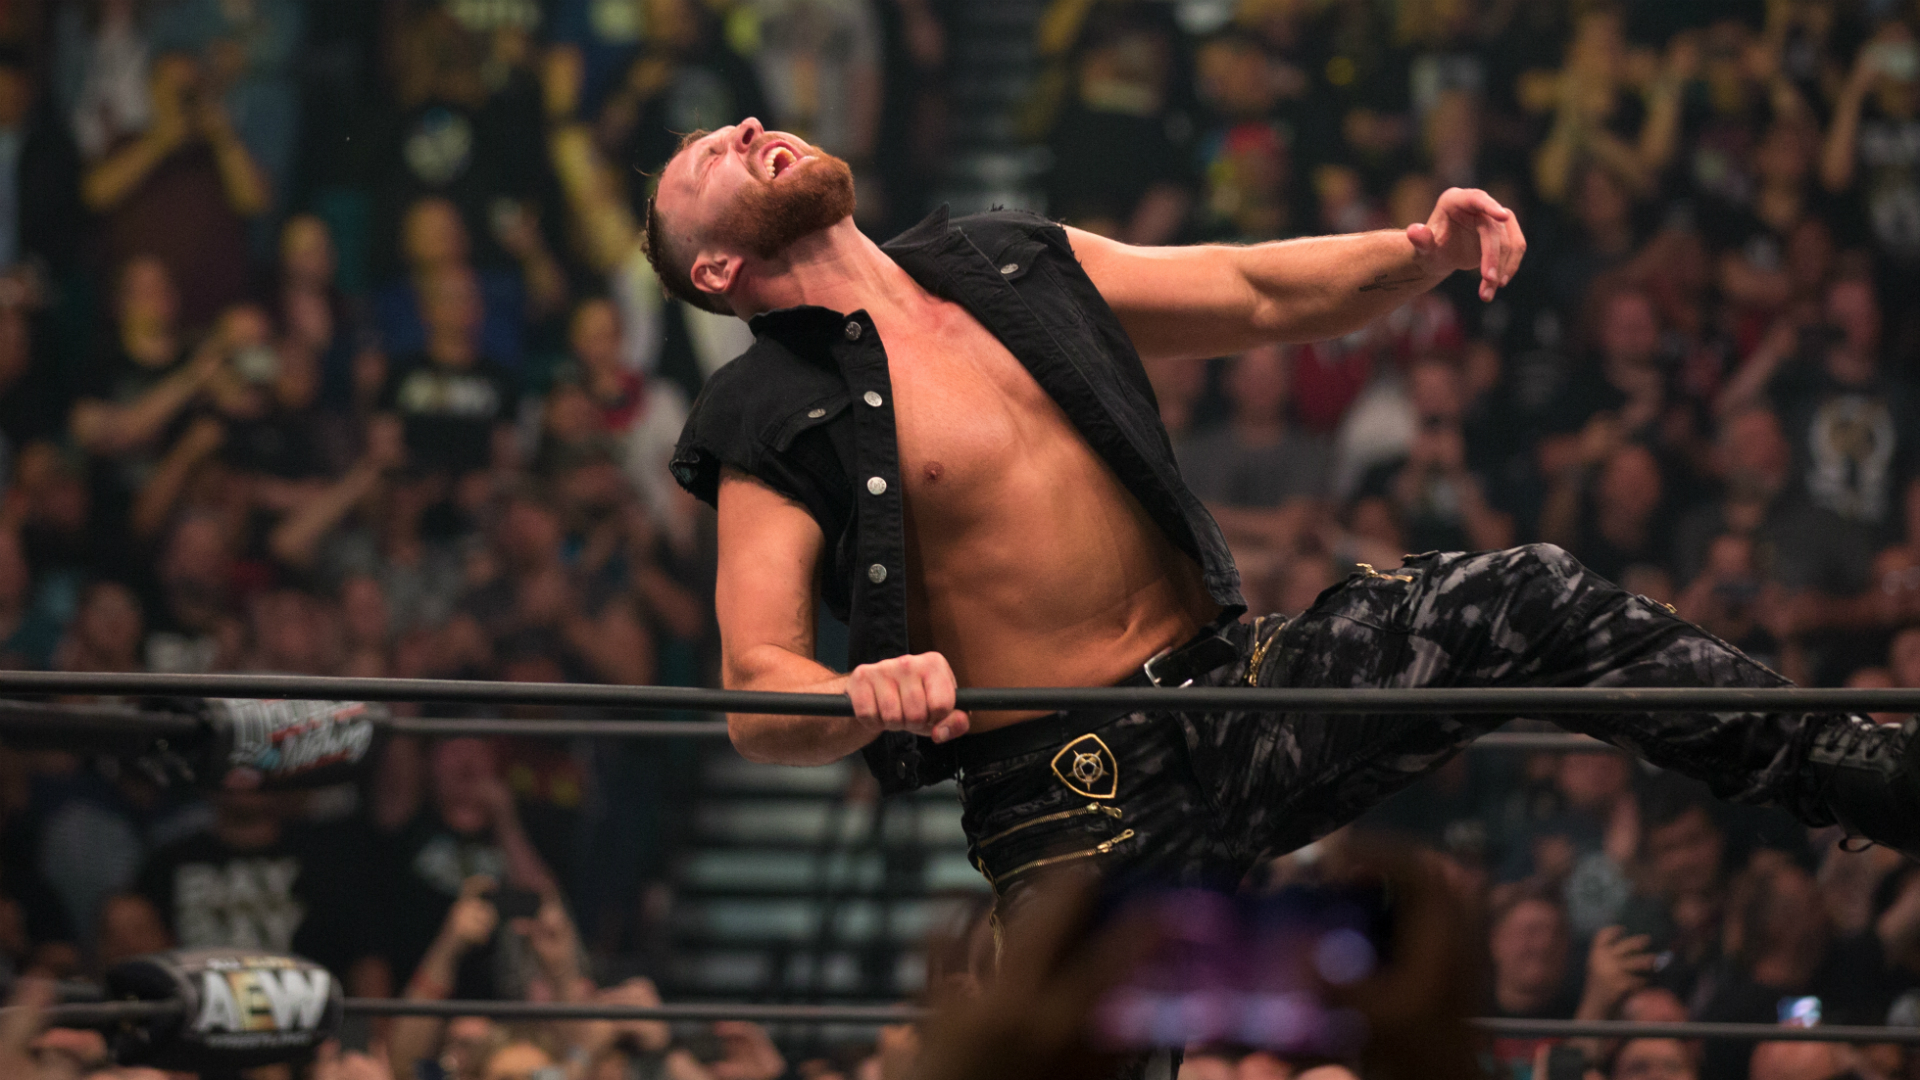 Jon Moxley mentioned how the older generations suffered the most